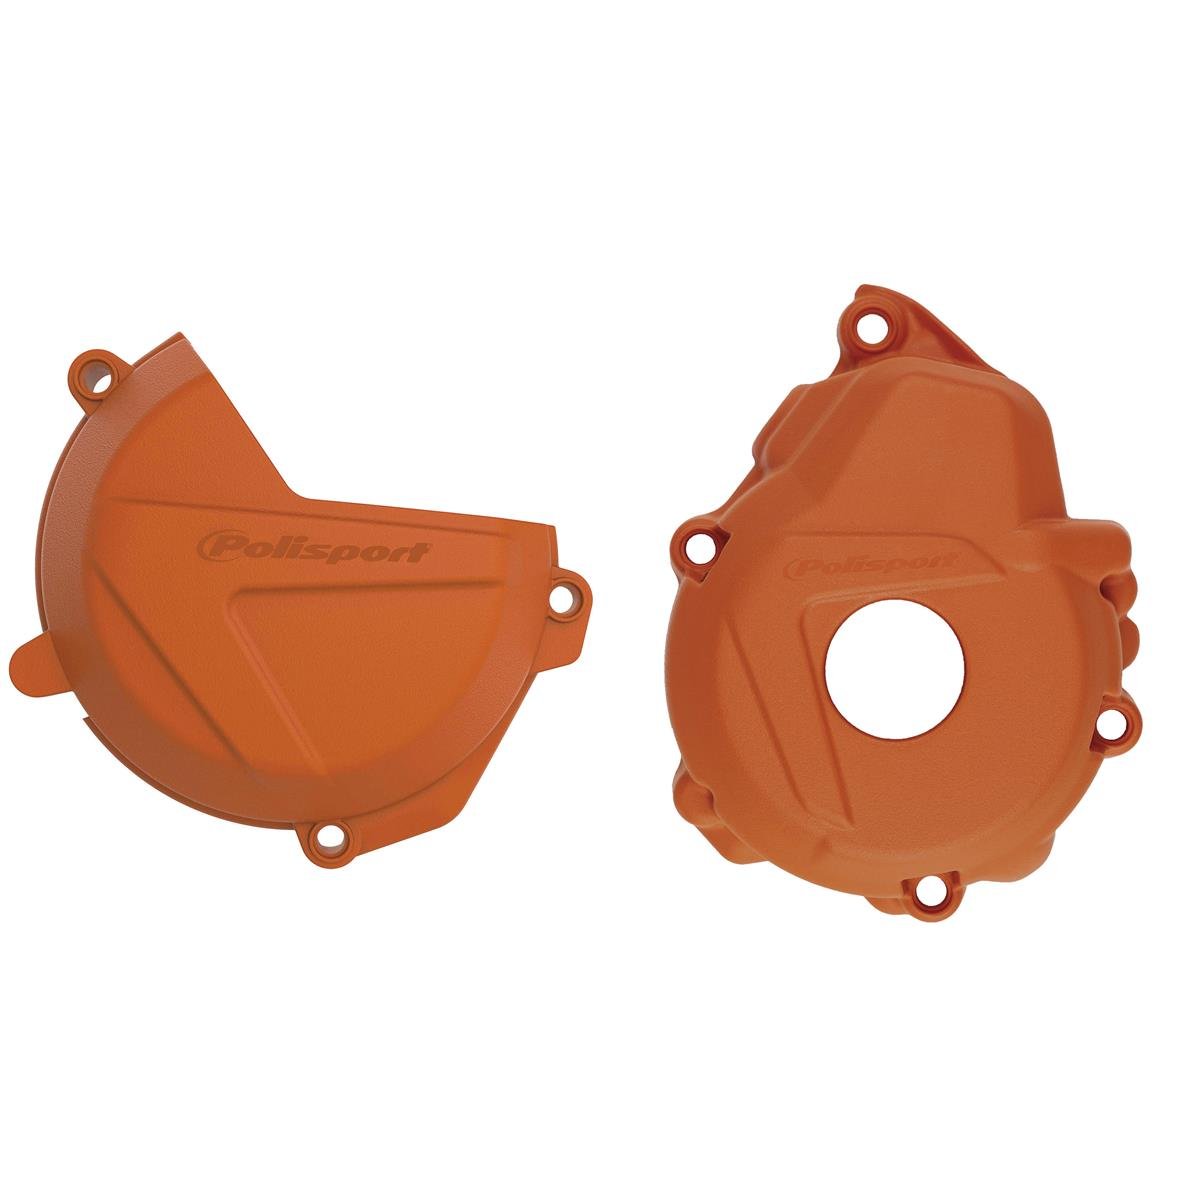 Polisport Clutch/Ignition Cover Protection  EXC-F 250/350 17-20, Orange